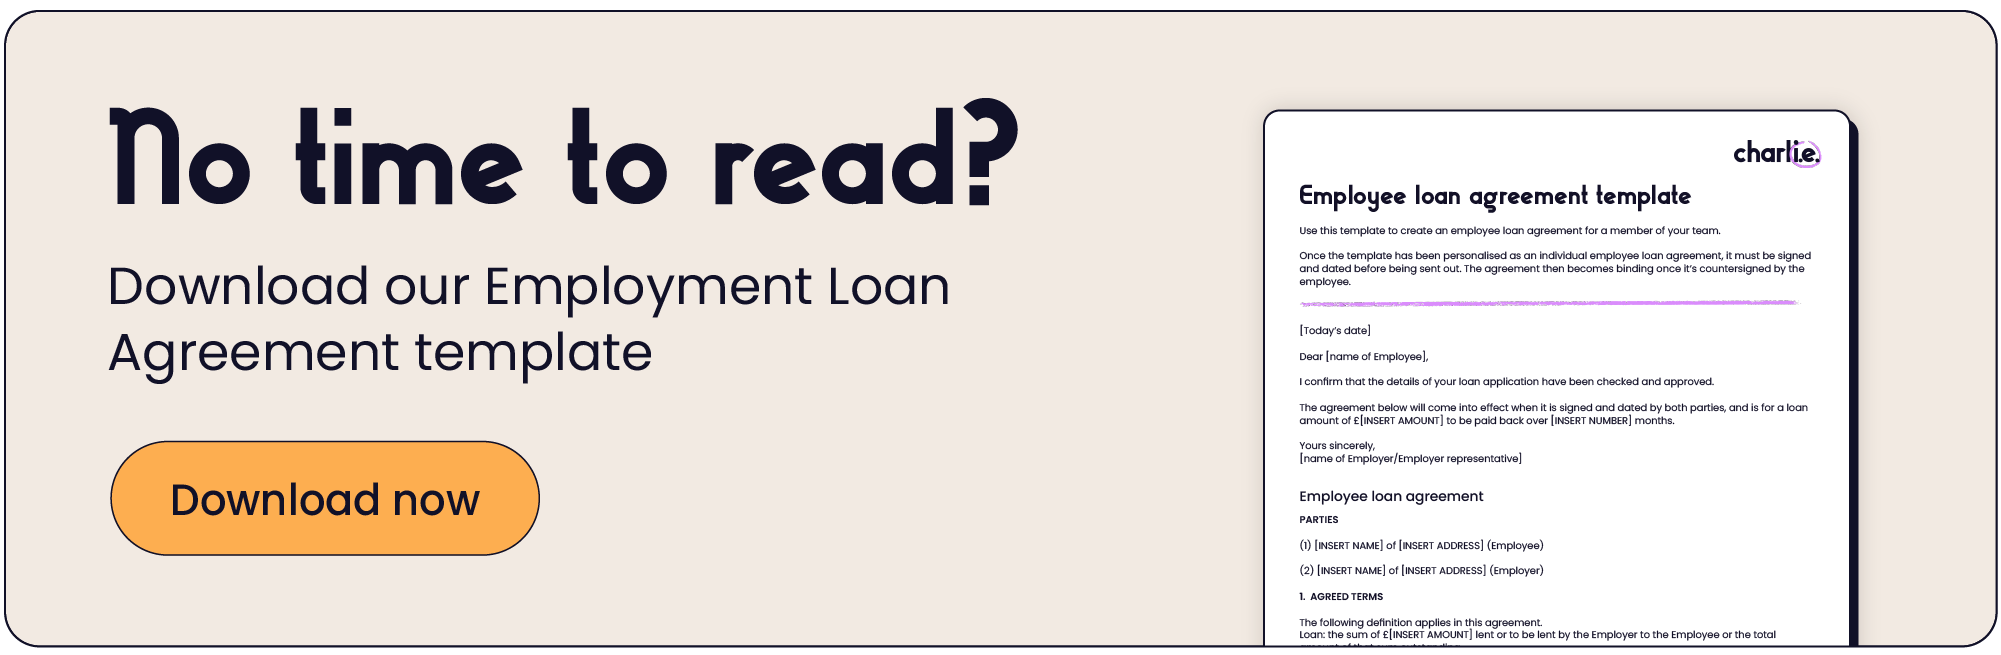 Download our employee loan agreement template